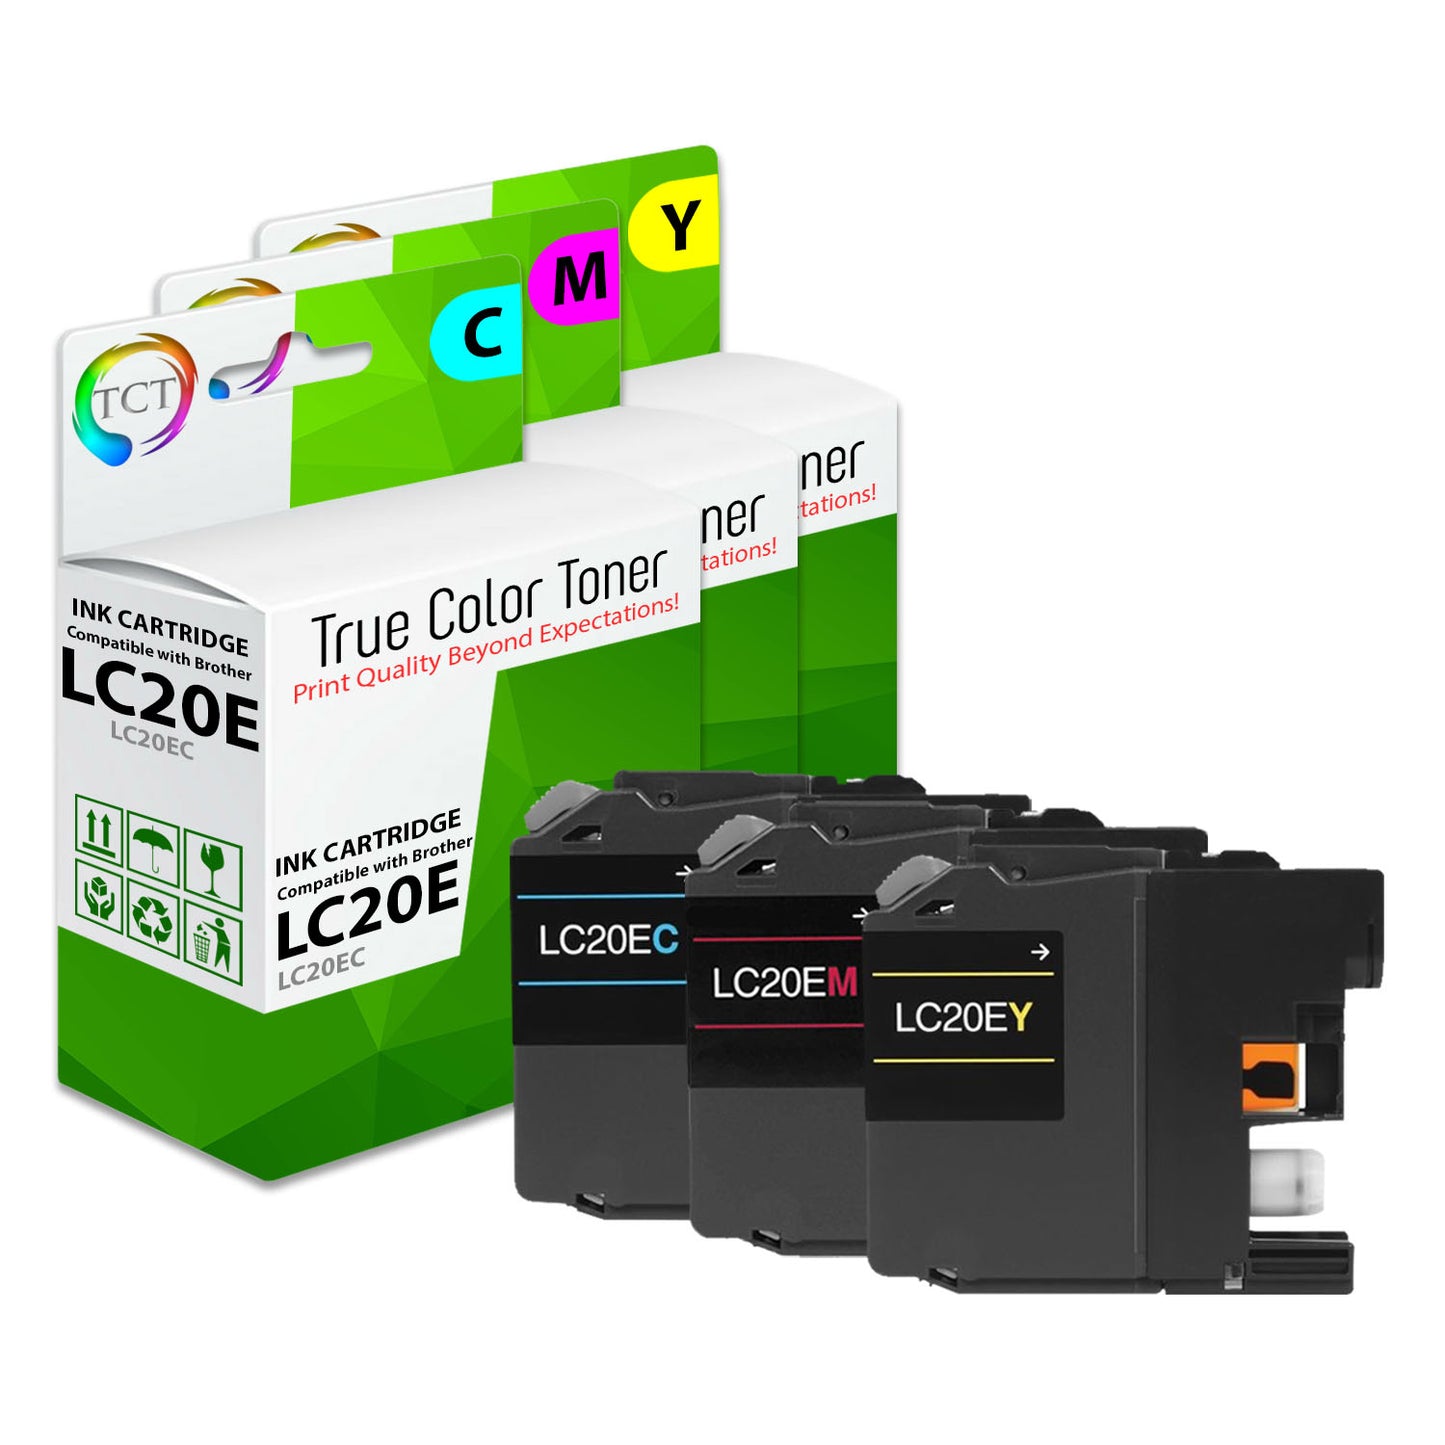 TCT Compatible Super HY Ink Cartridge Replacement for the Brother LC20E Series - 3 Pack (C, M, Y)